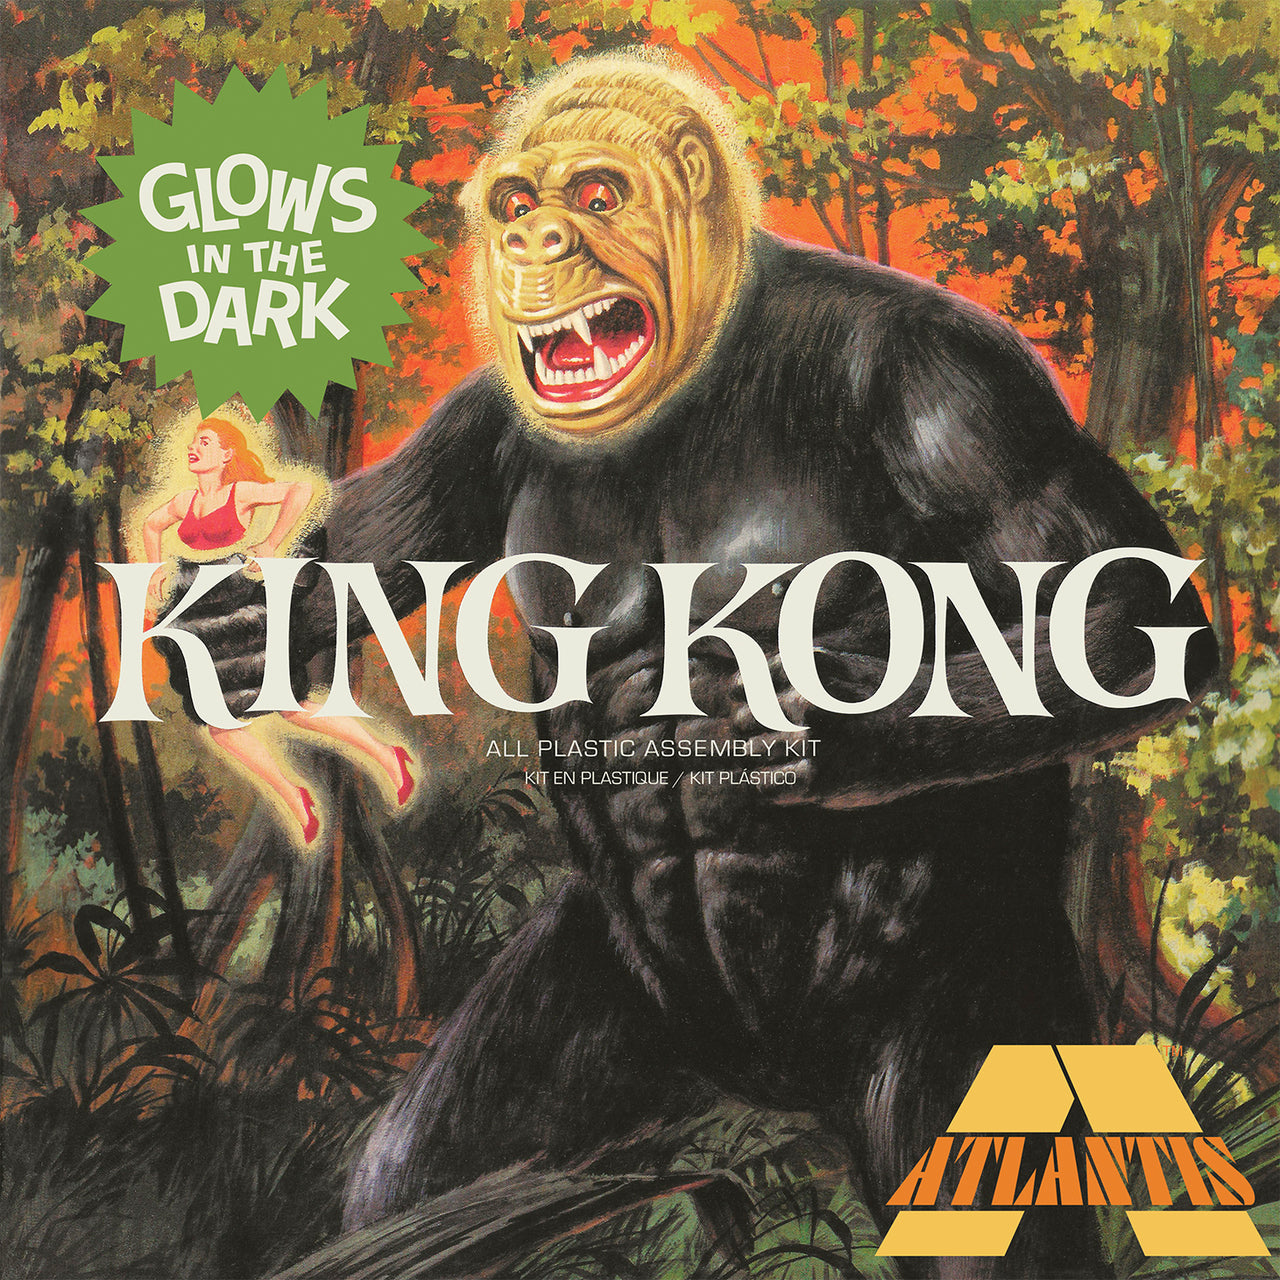 1/30 KONG GLOW EDITION A465 – Burbank's House of Hobbies